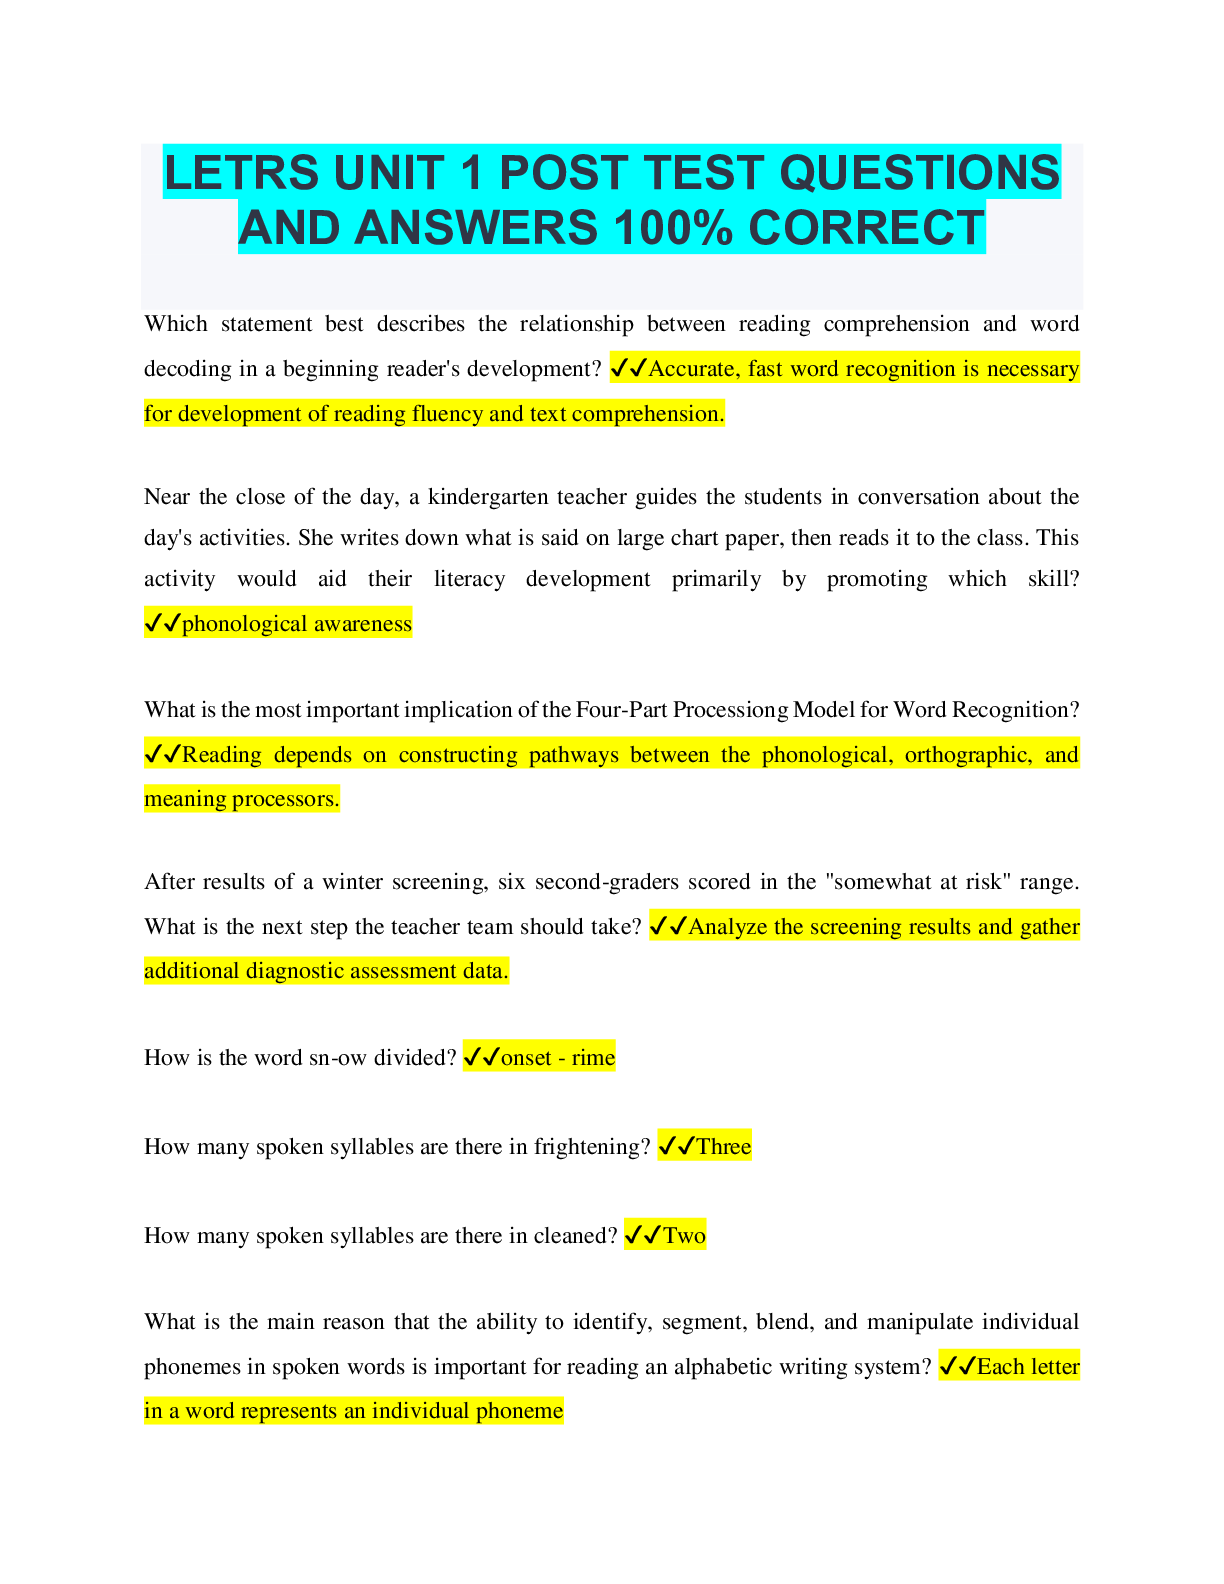 letrs-unit-1-post-test-questions-and-answers-100-correct